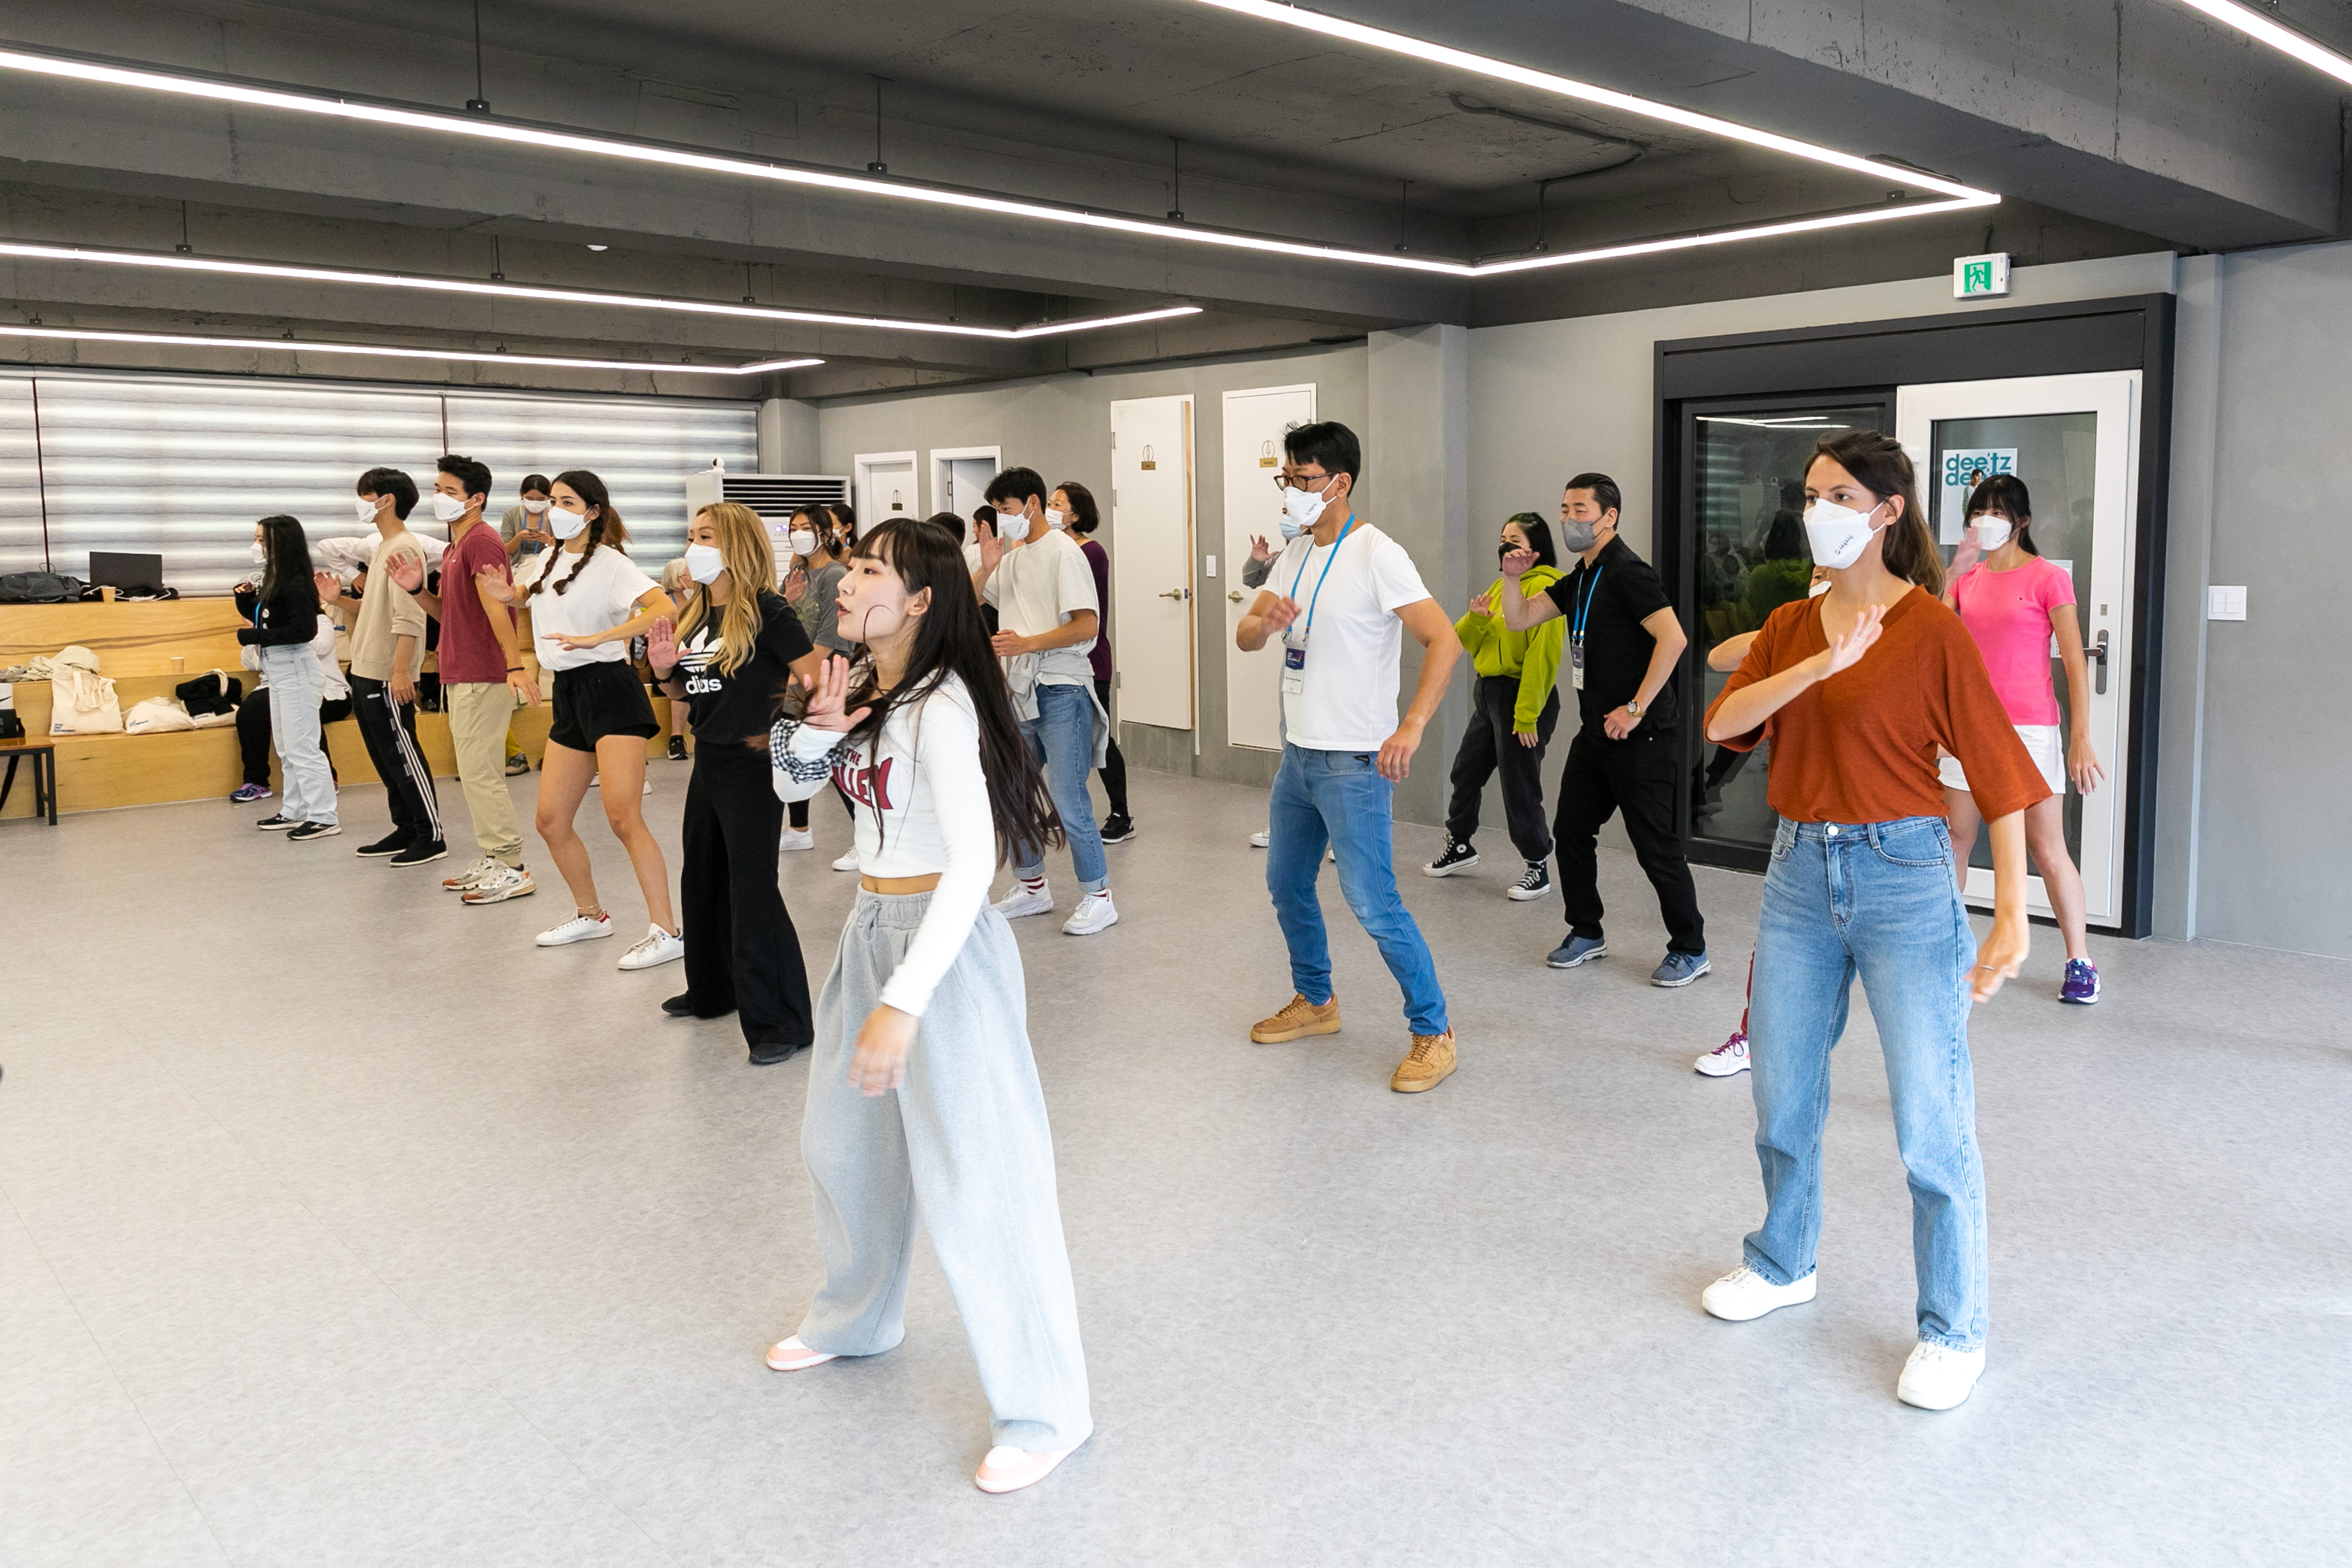 [K-Pop] Adoptee participants learning K-Pop dance moves, one of the leading K-content, enjoying the dynamic side of Korean culture with their bodies